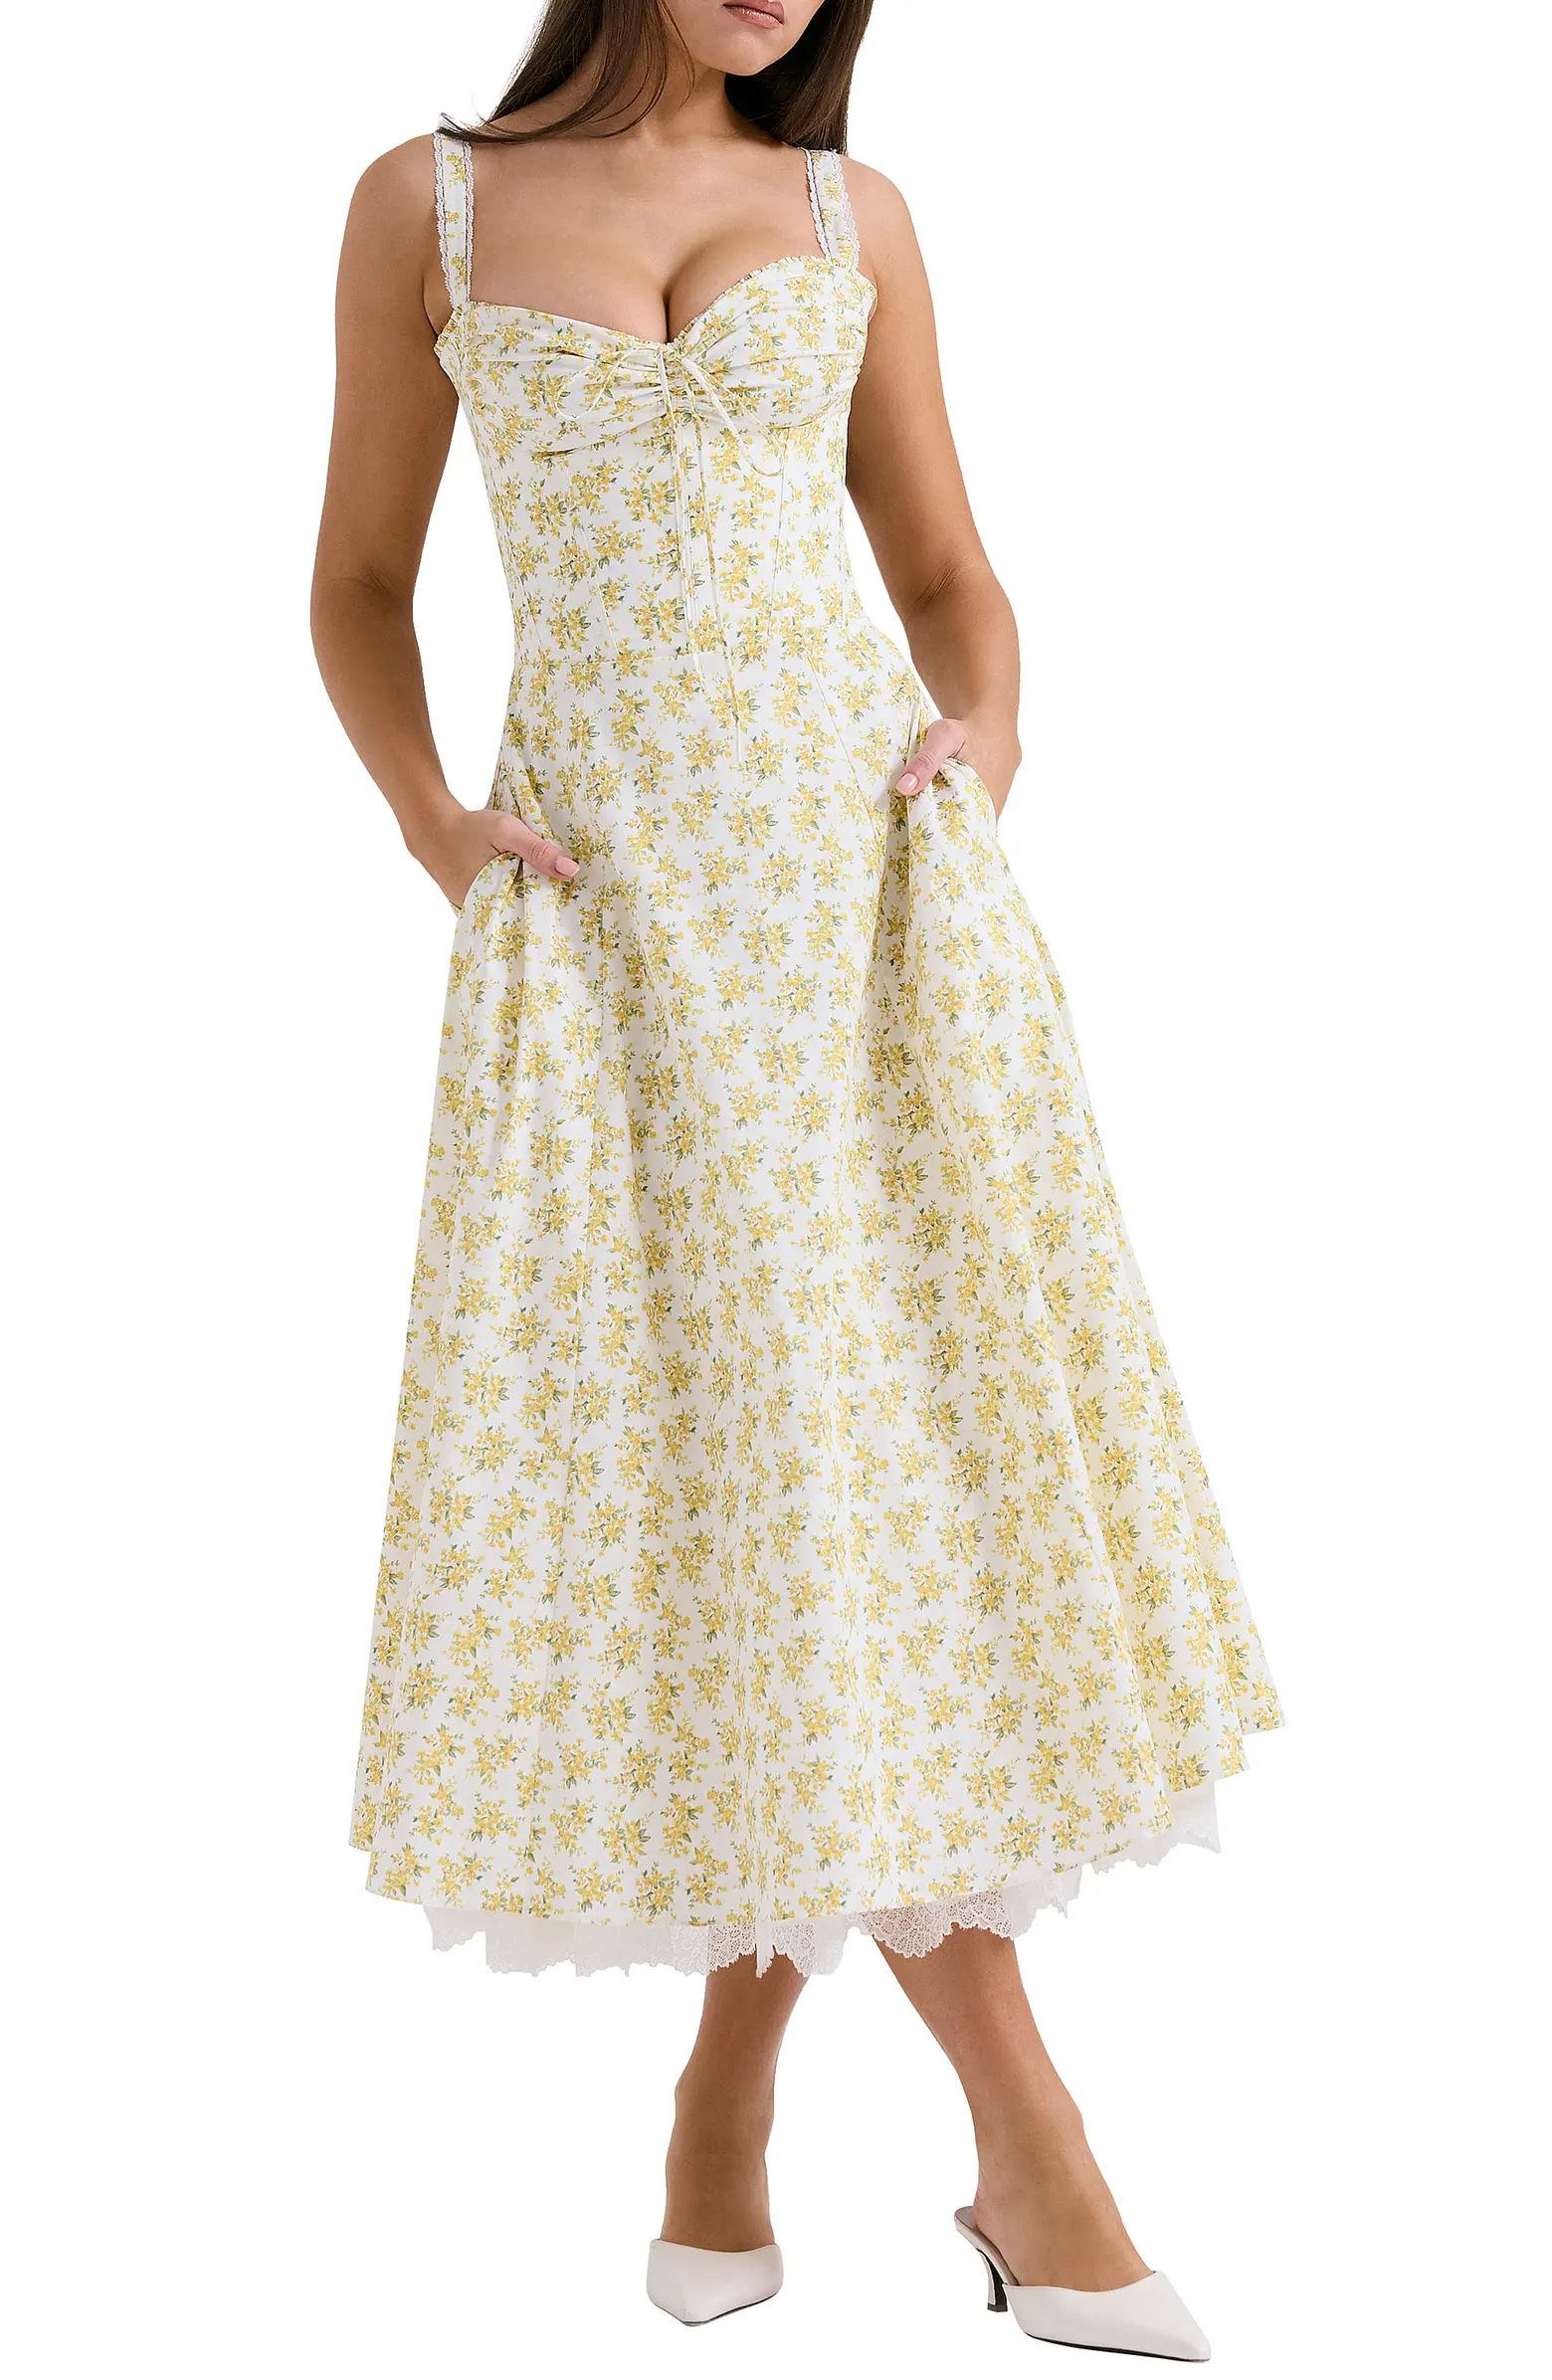 Rosalee Floral Stretch Cotton Petticoat Dress | Nordstrom